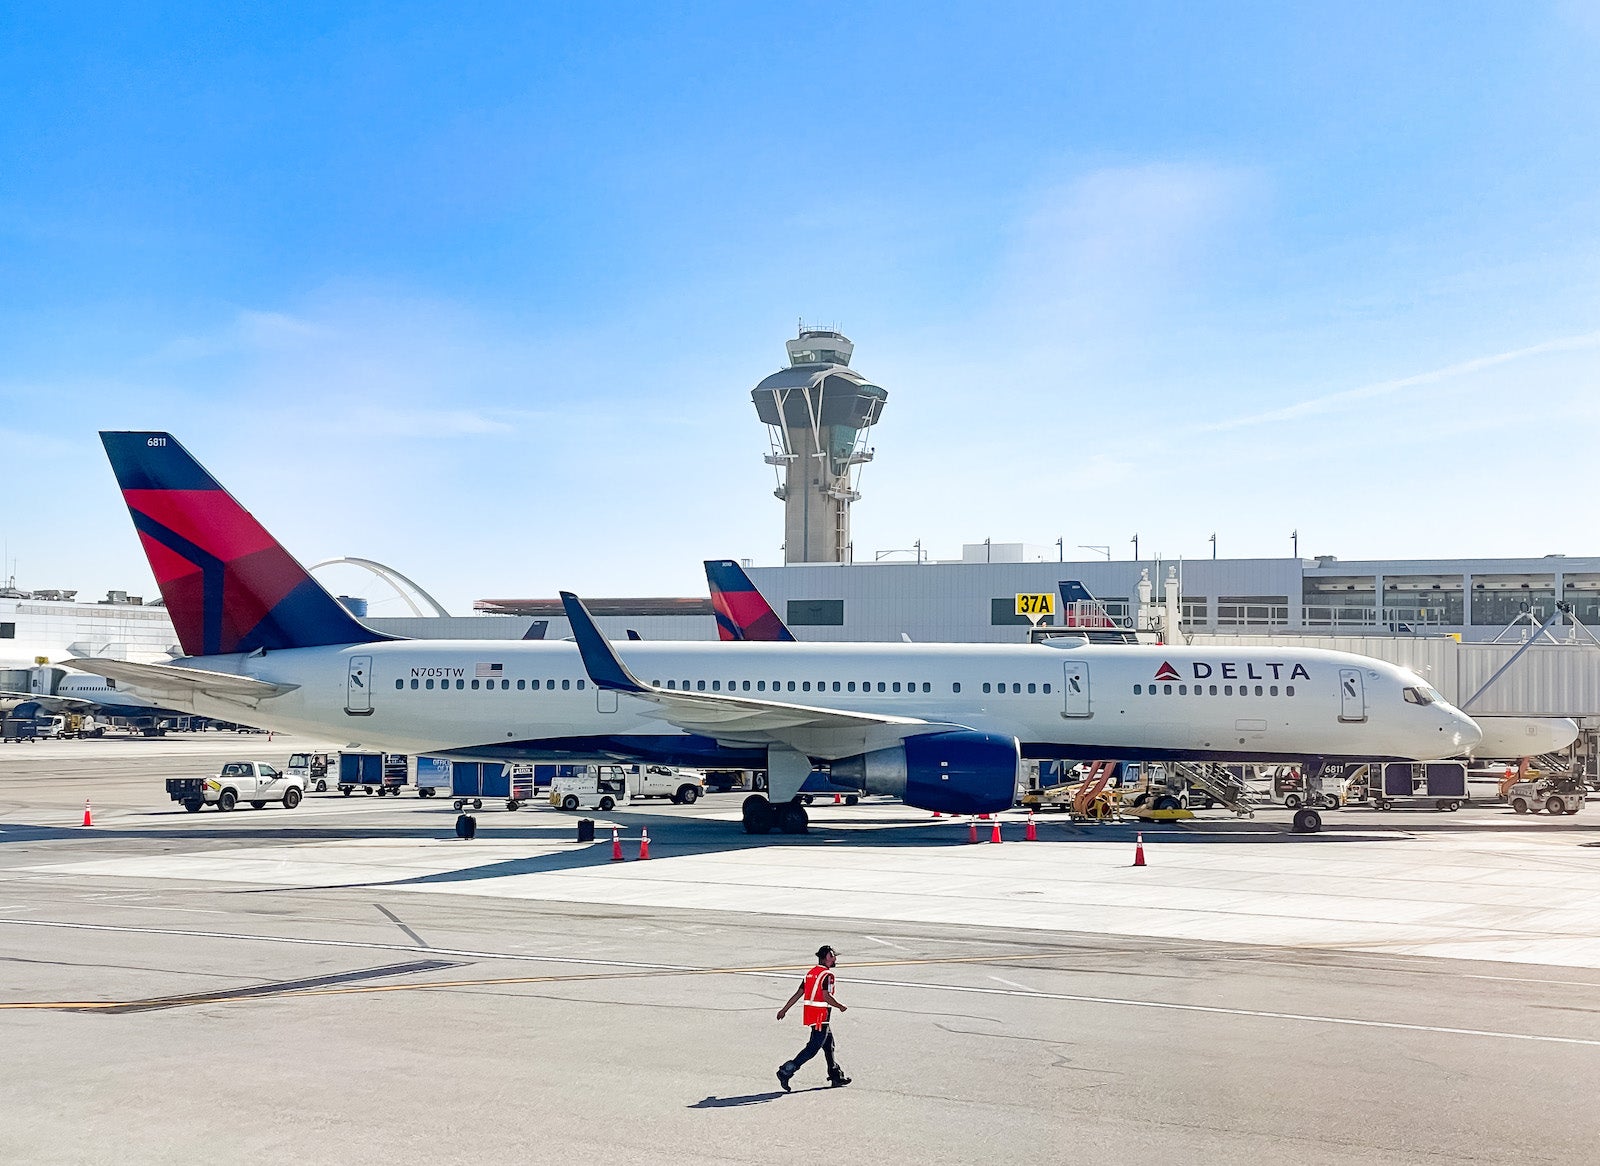 Delta Boeing 757-200 at the gate in Los Angeles